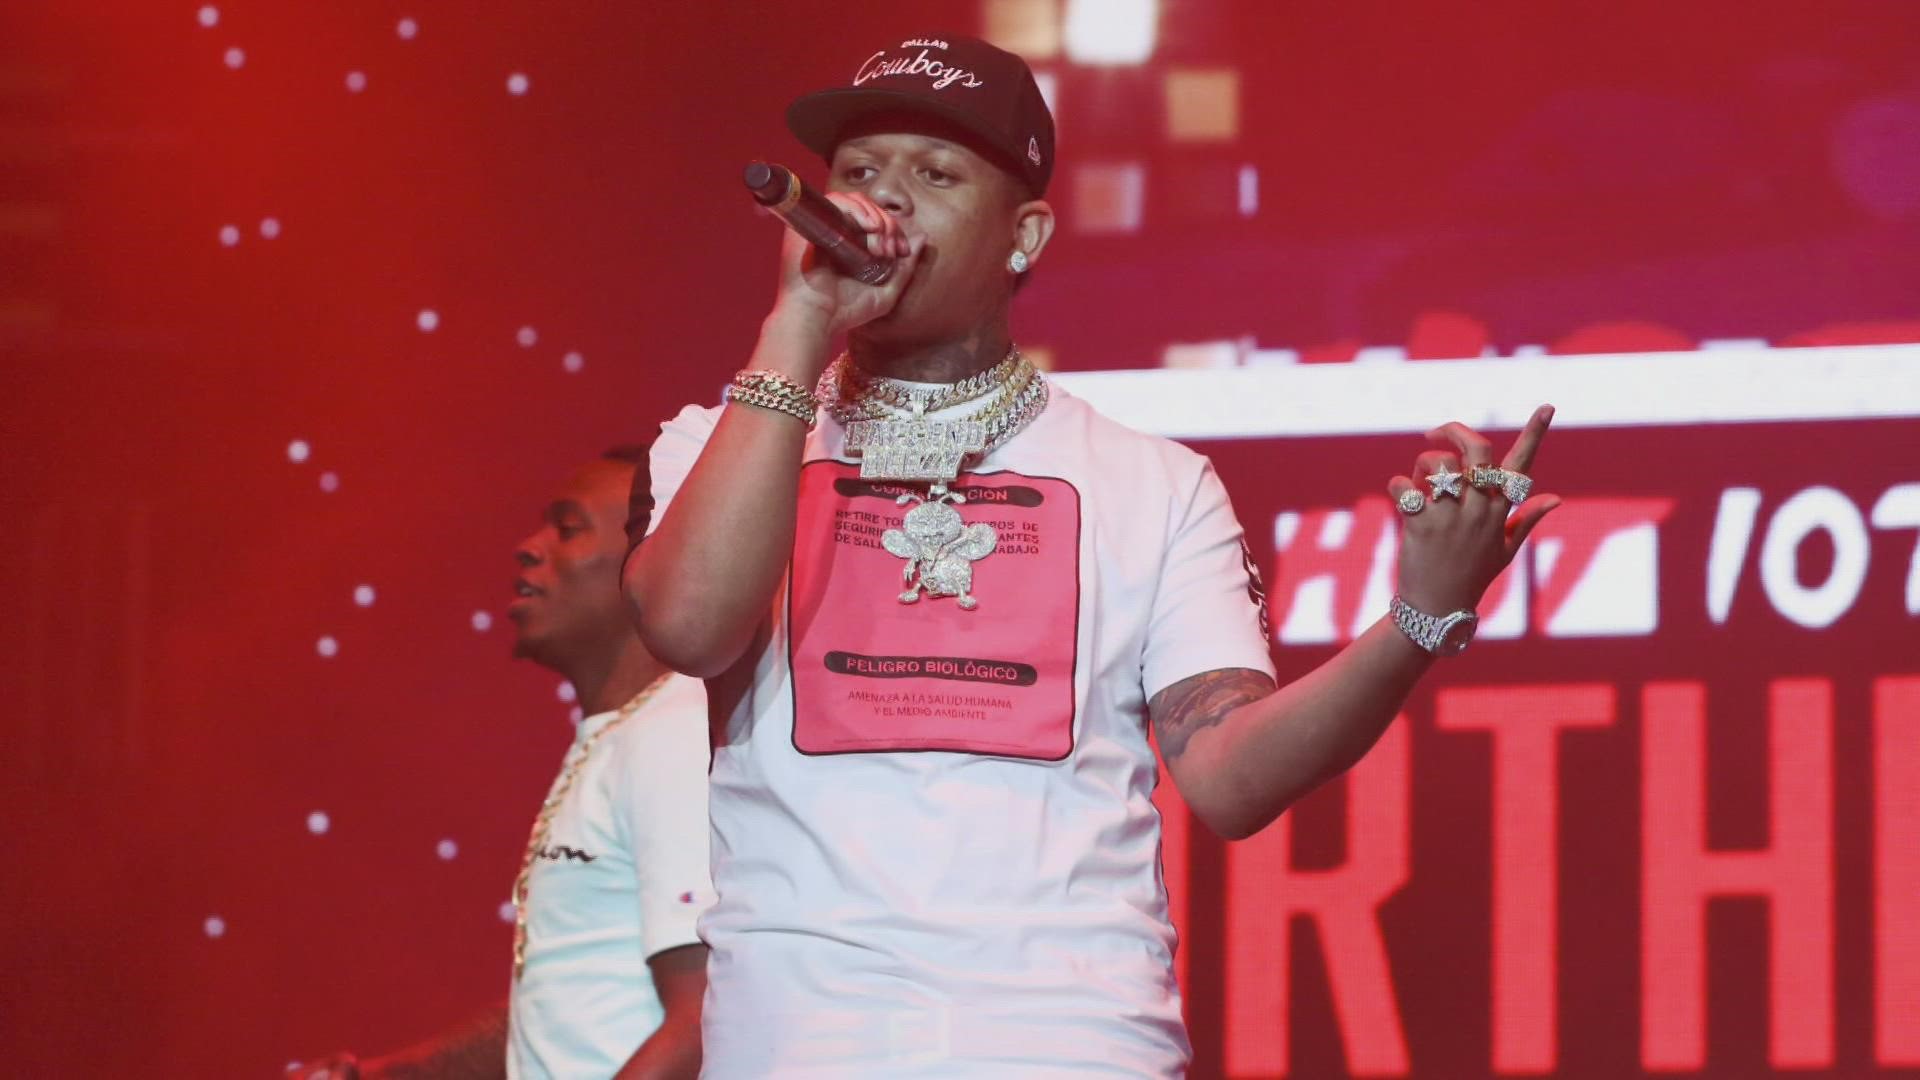 This is the Dallas rapper's third arrest this year.